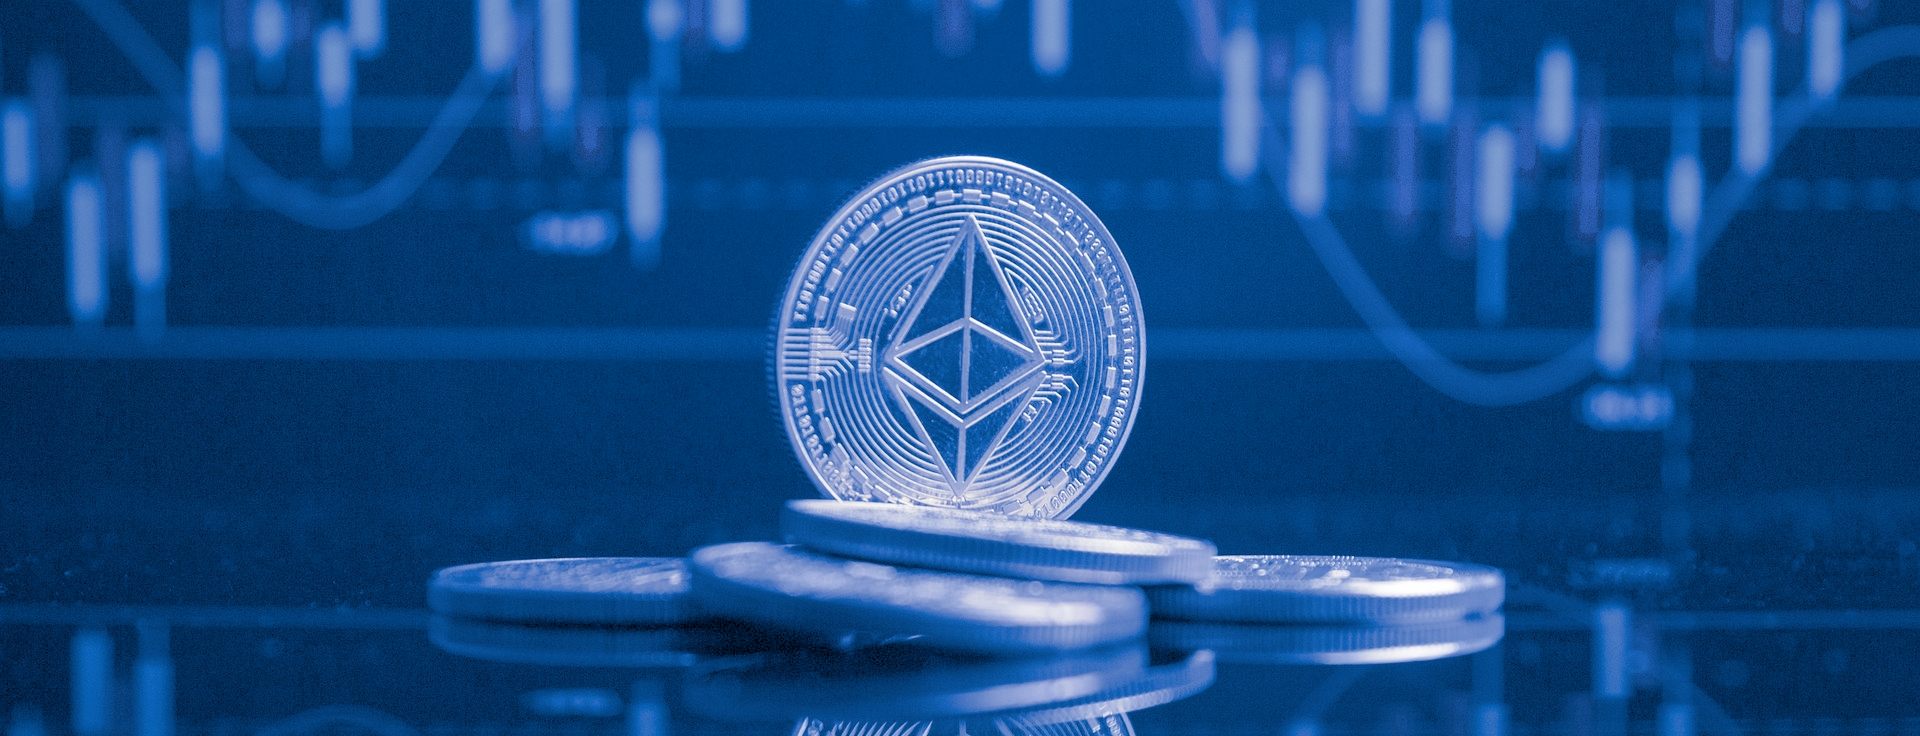 Ethereum Spot ETF Approved in the United States - What Does This Mean?